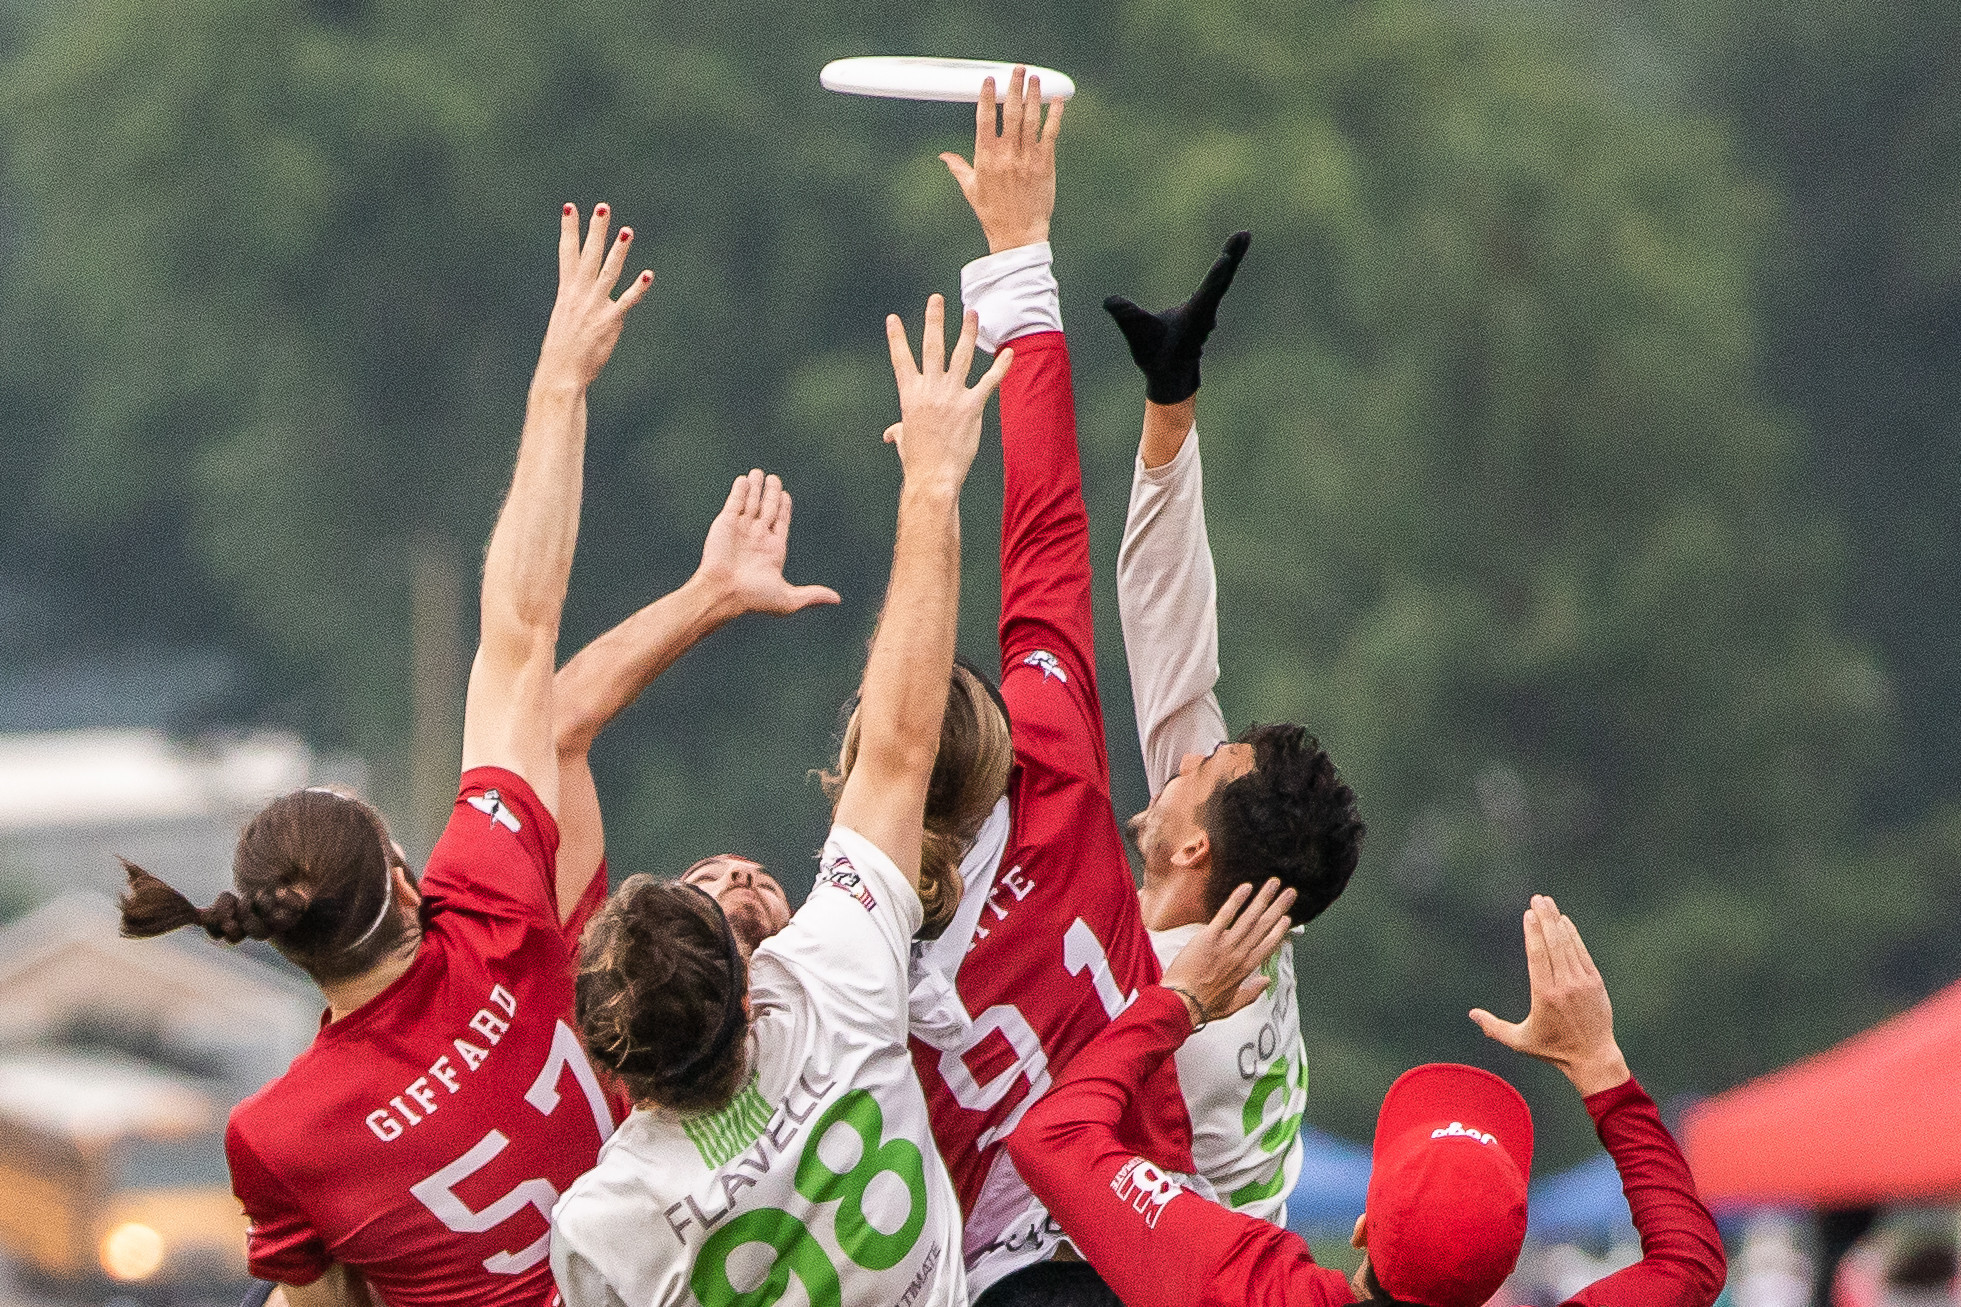 A call could be treated as contested if the two ultimate teams cannot agree on the decision ©Katie Cooper for Ultiphotos 